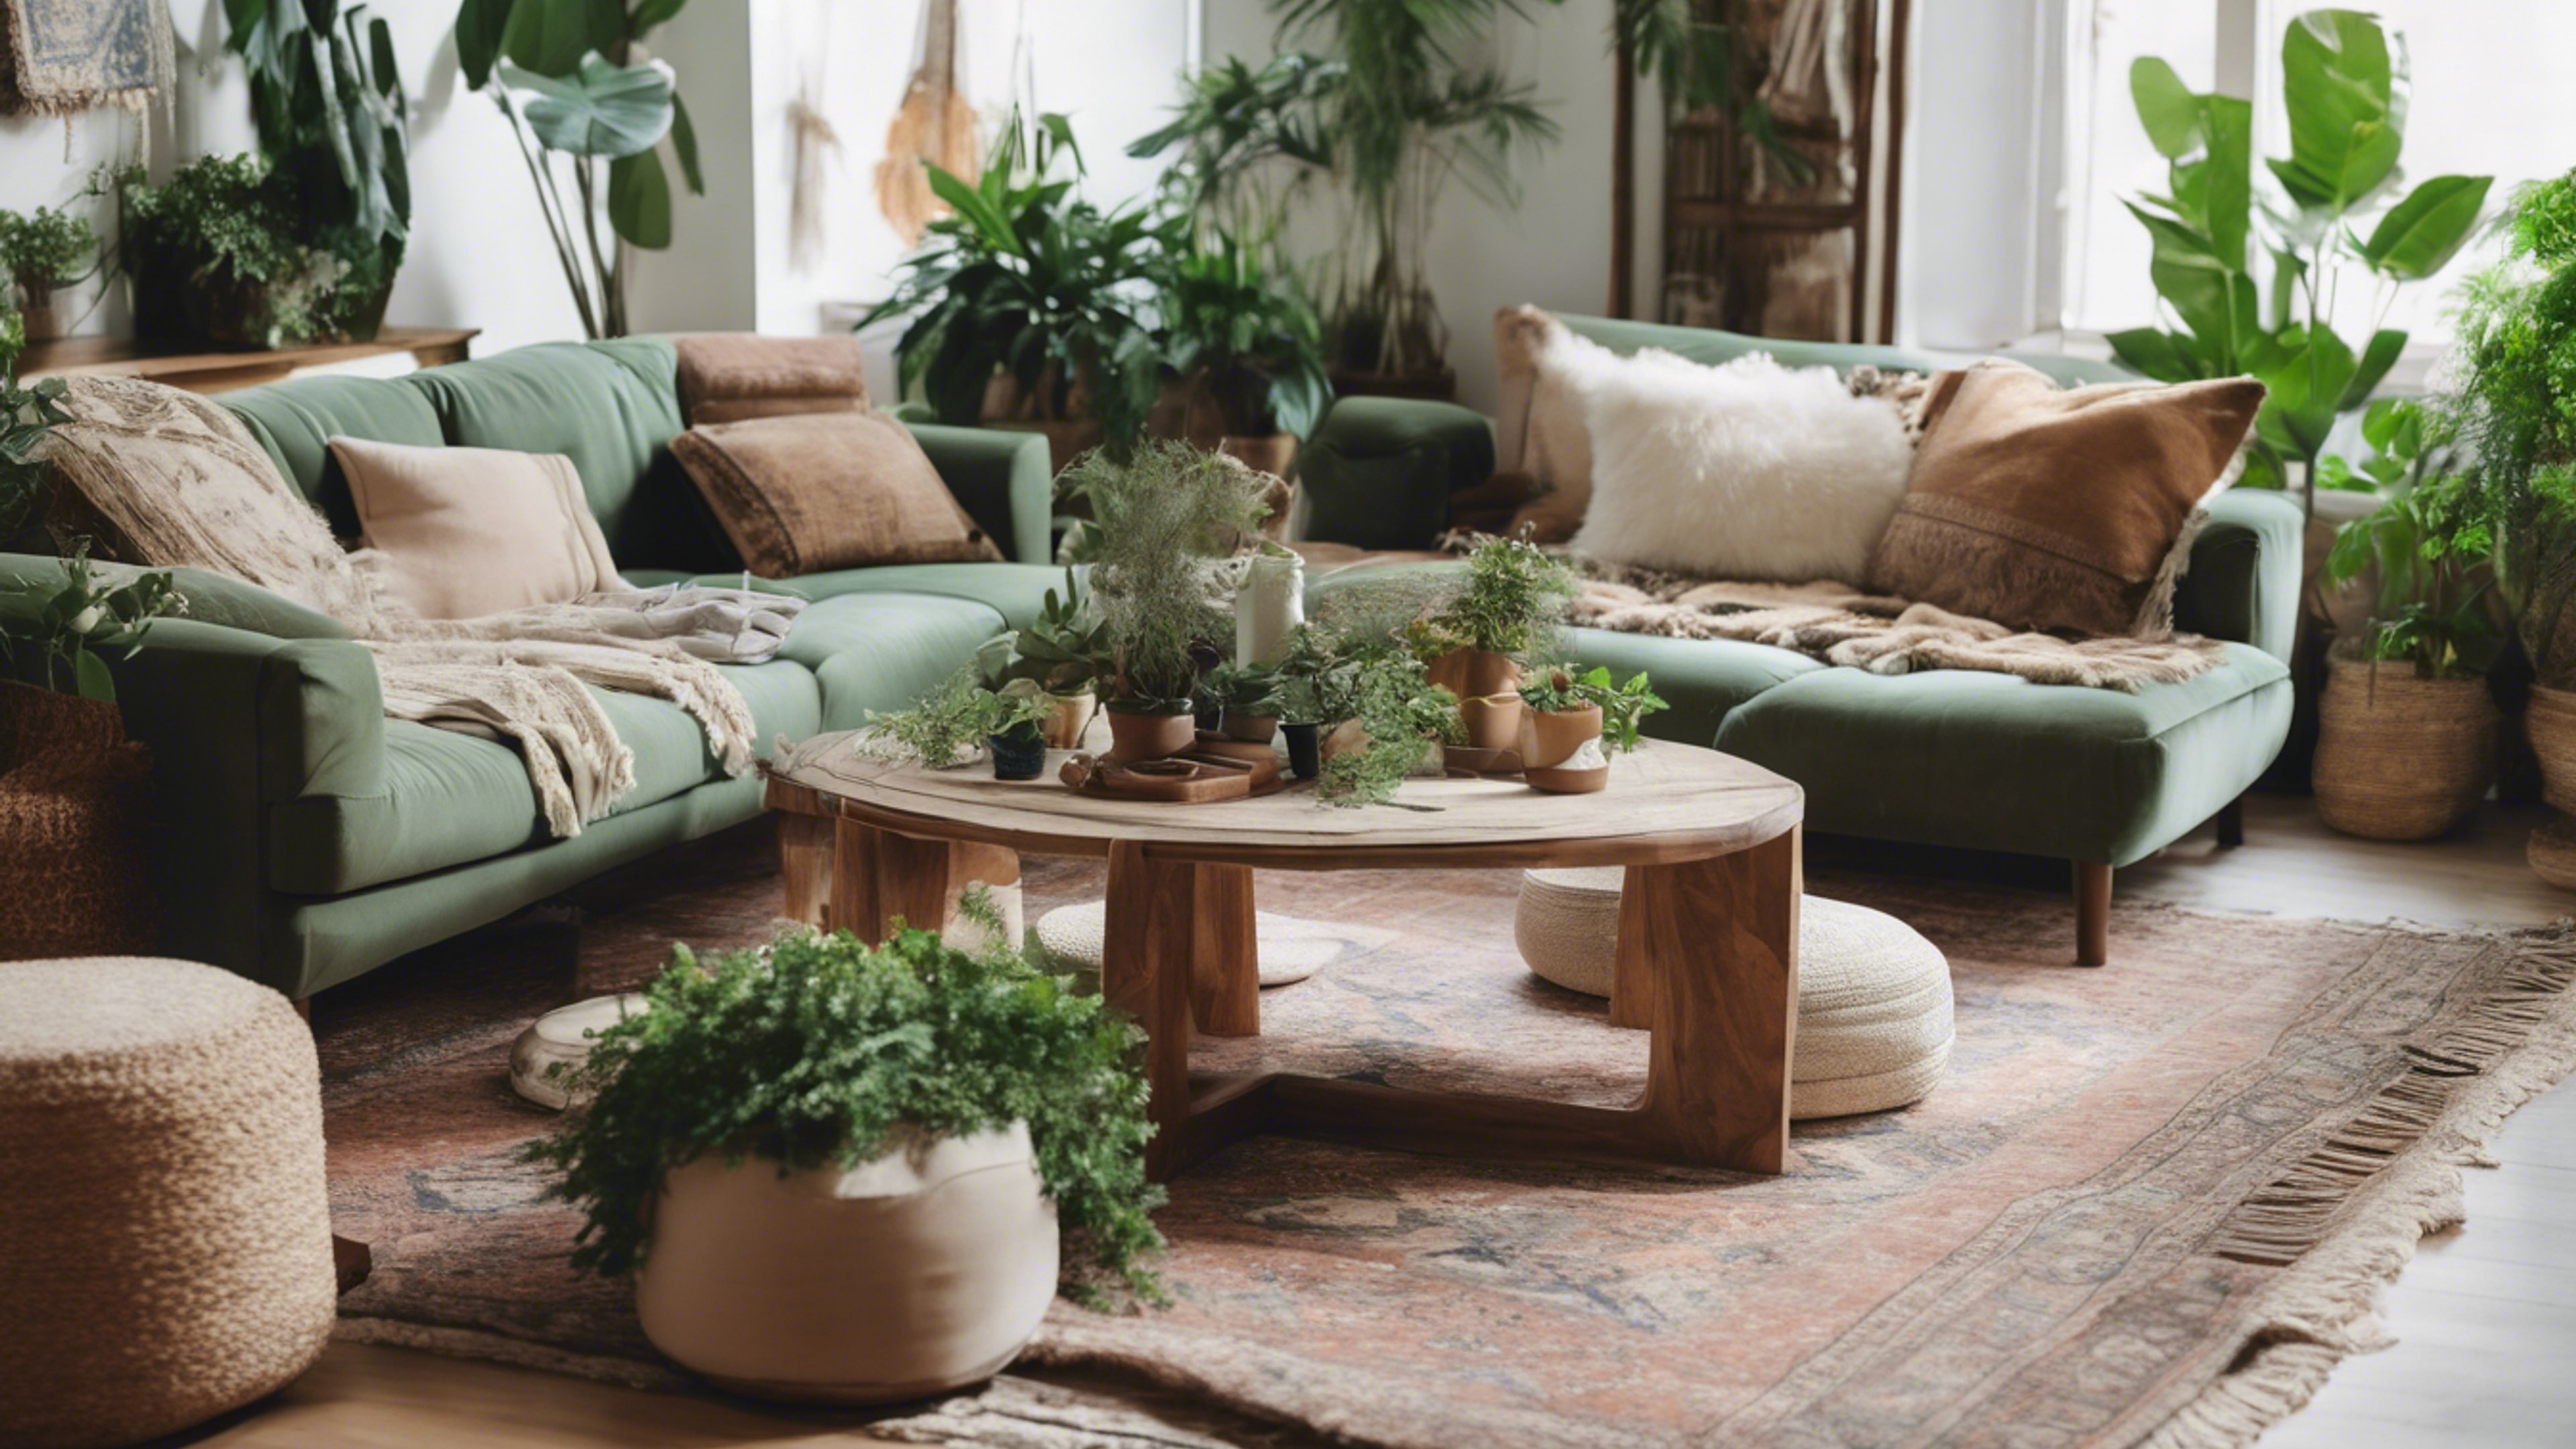 An inviting boho living room with a neutral color palette, featuring a floor seating arrangement, a lot of green plants, and a large Persian rug. วอลล์เปเปอร์[3b2820ebc0844567949f]